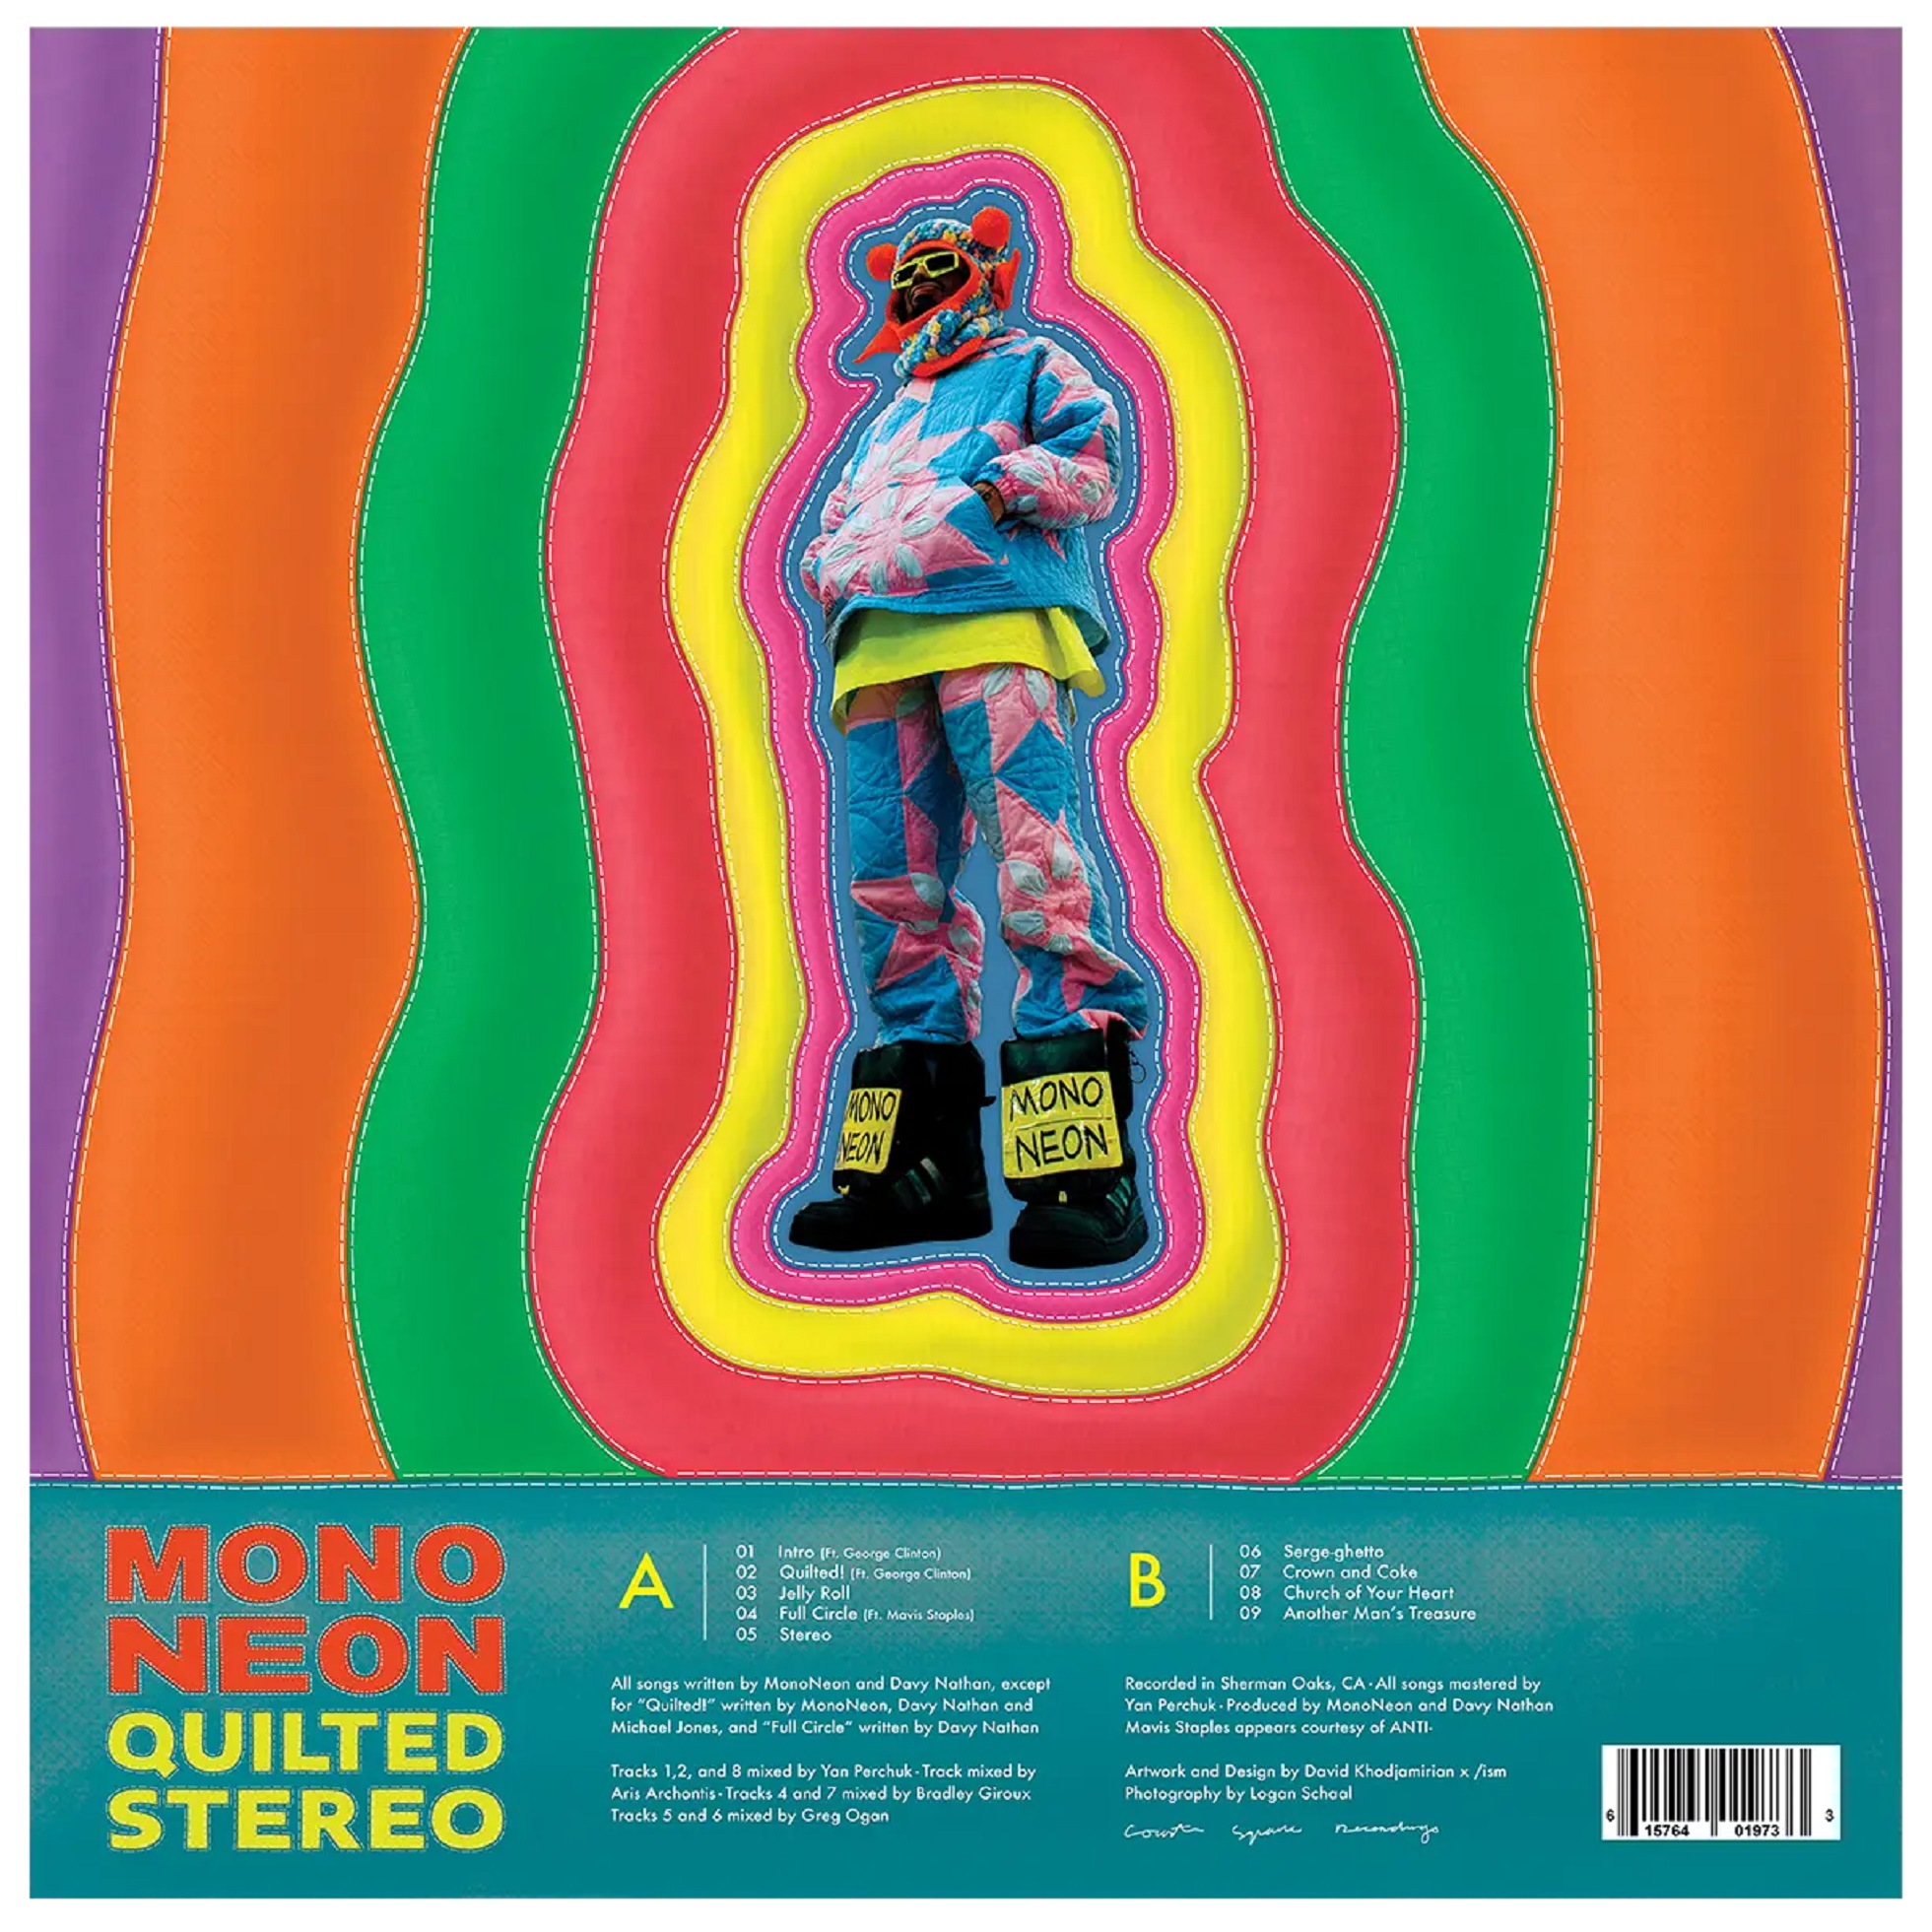 GRAMMY Award-Winning Bassist and Experimental Musician, MonoNeon, Releases High-Energy Single “Jelly Roll” from Upcoming Album Quilted Stereo